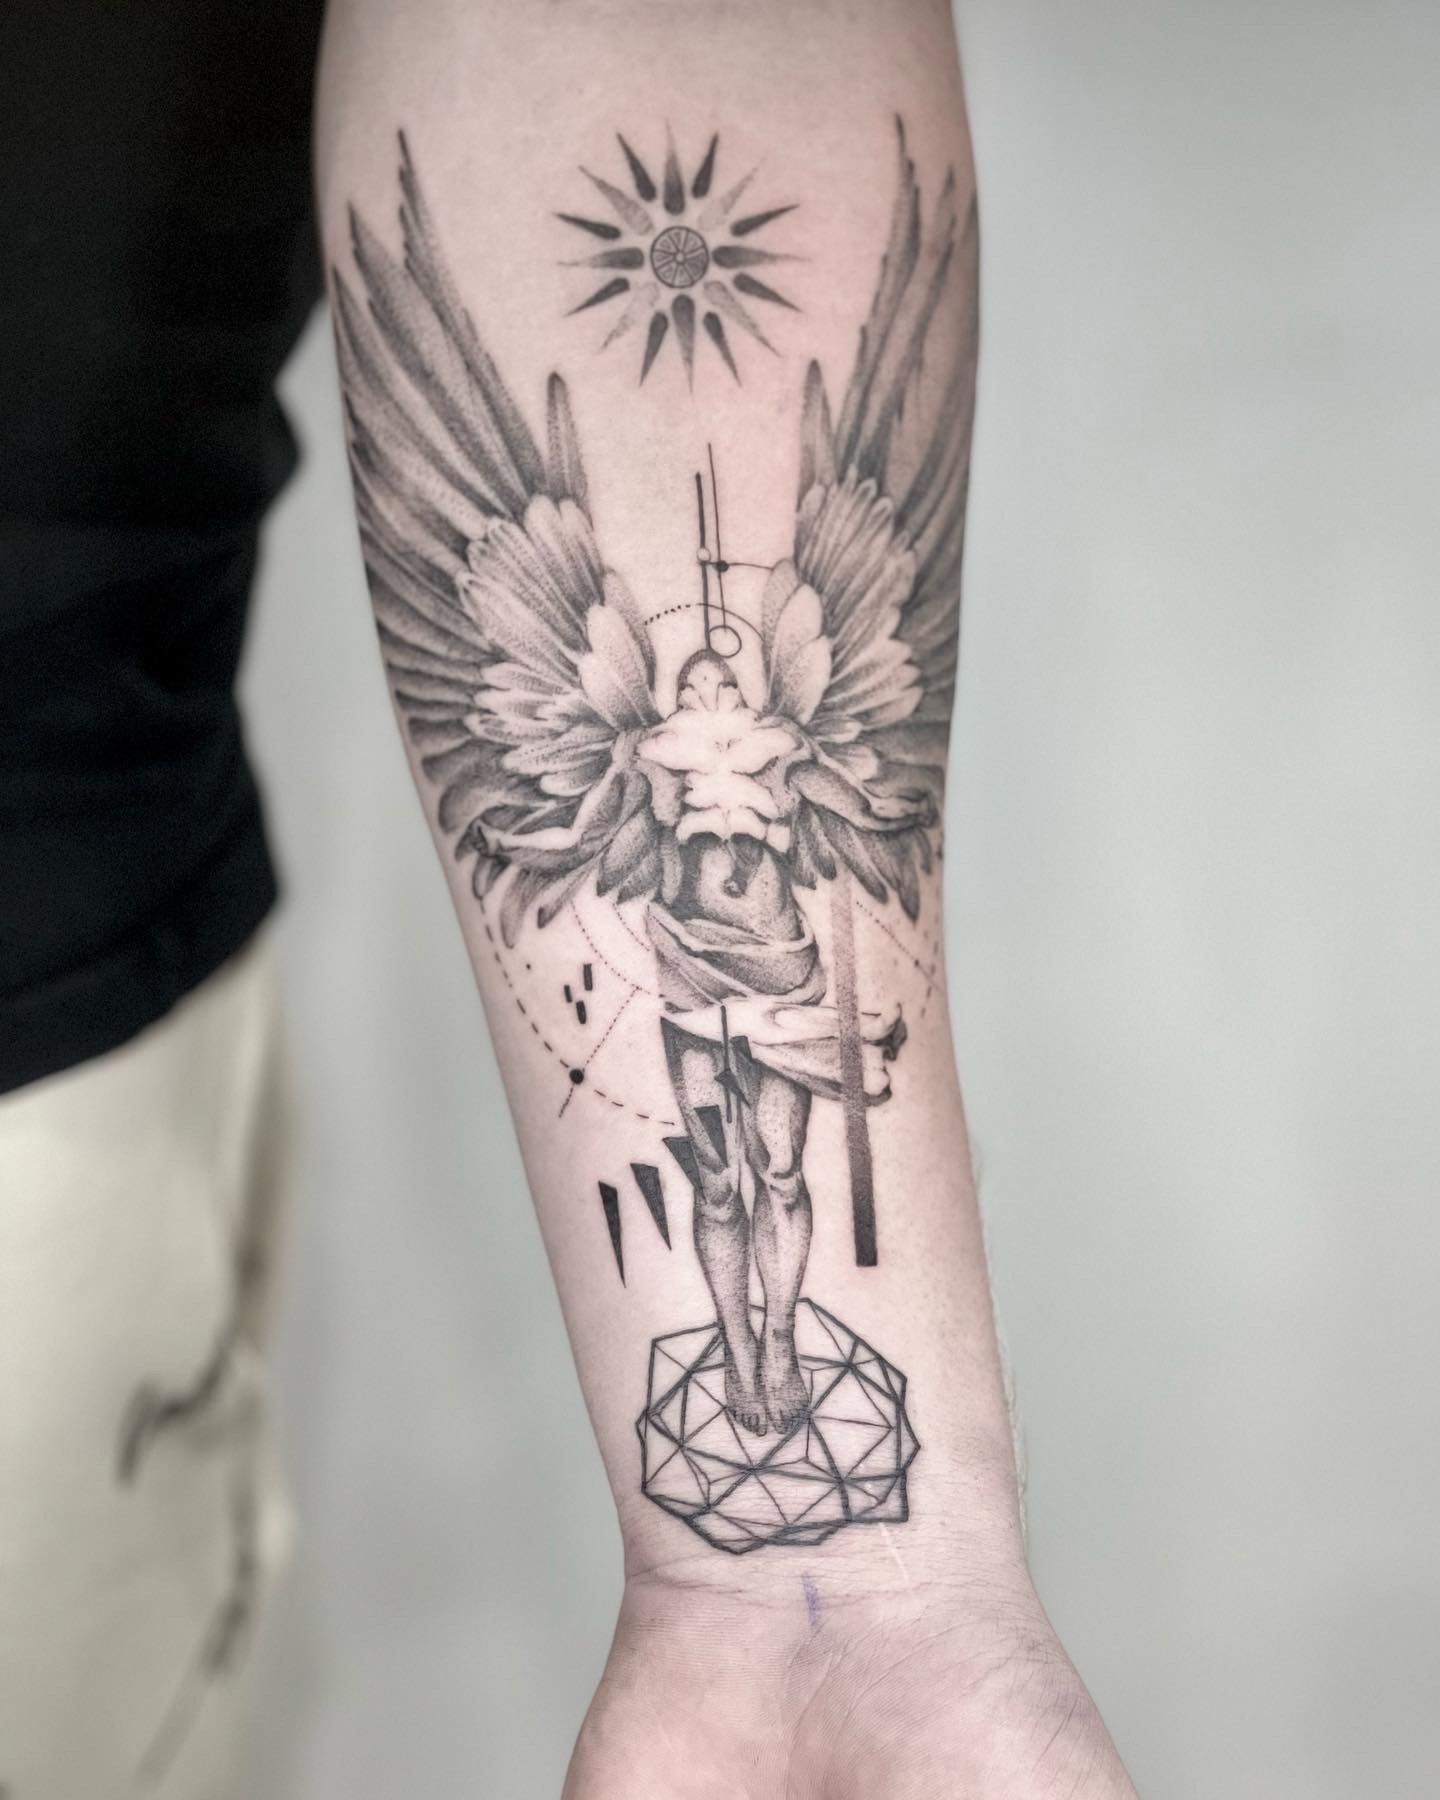 14 Guardian Angel Tattoo Ideas You Have To See To Believe  alexie